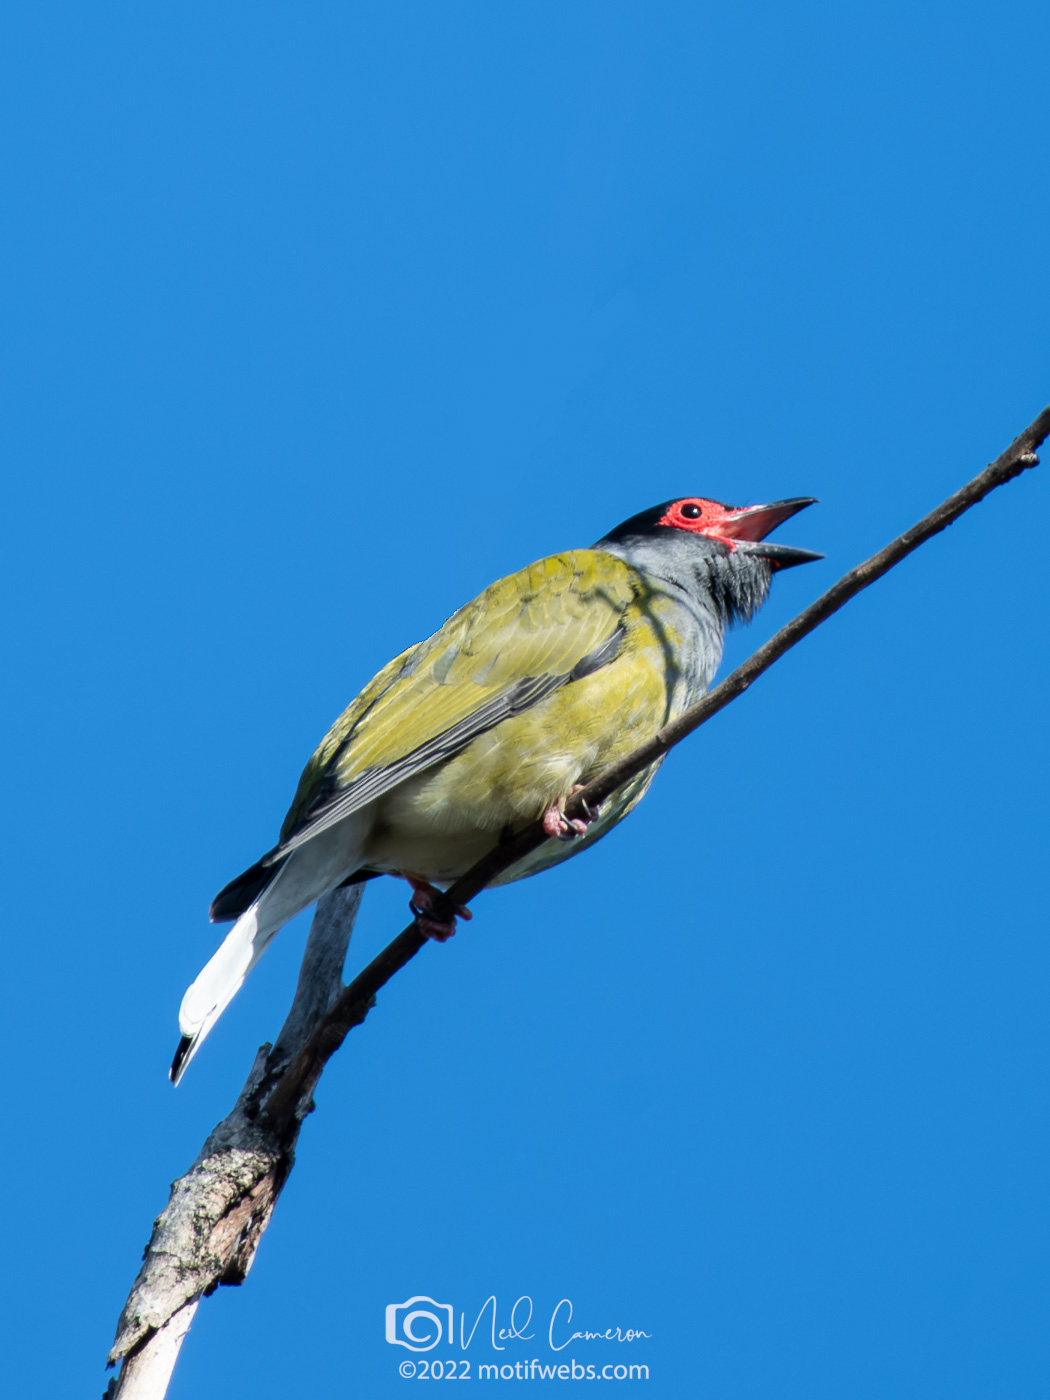 Male Australasian Figbird (Sphecotheres vieilloti), Oxley Creek Common, Queensland